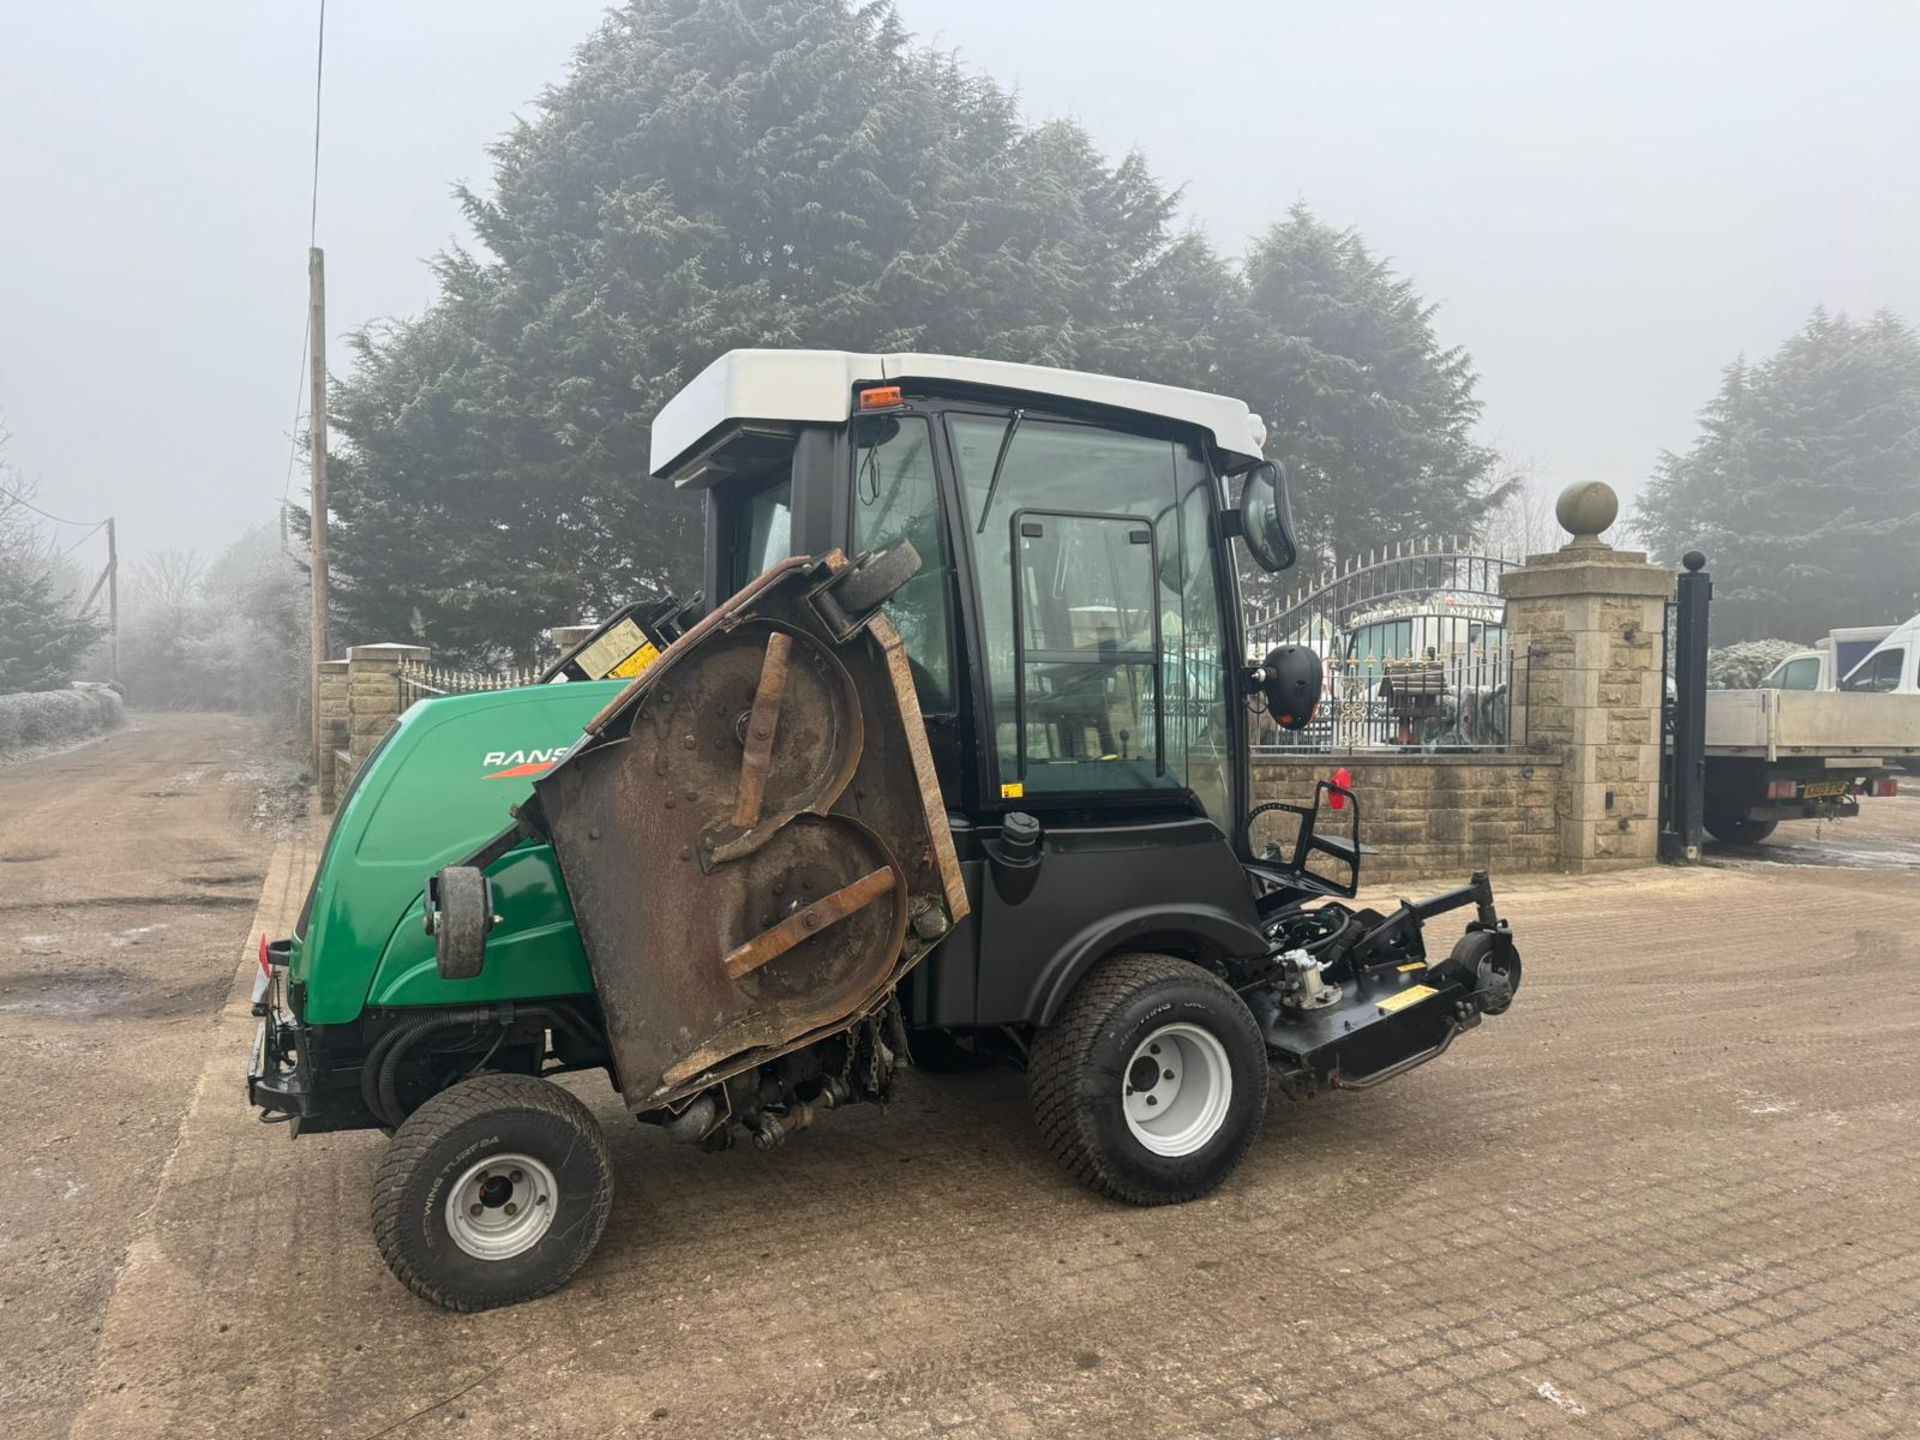 2016 RANSOMES RMP493 BATWING RIDE ON LAWN MOWER WITH FULL GLASS CAB *PLUS VAT* - Image 24 of 33